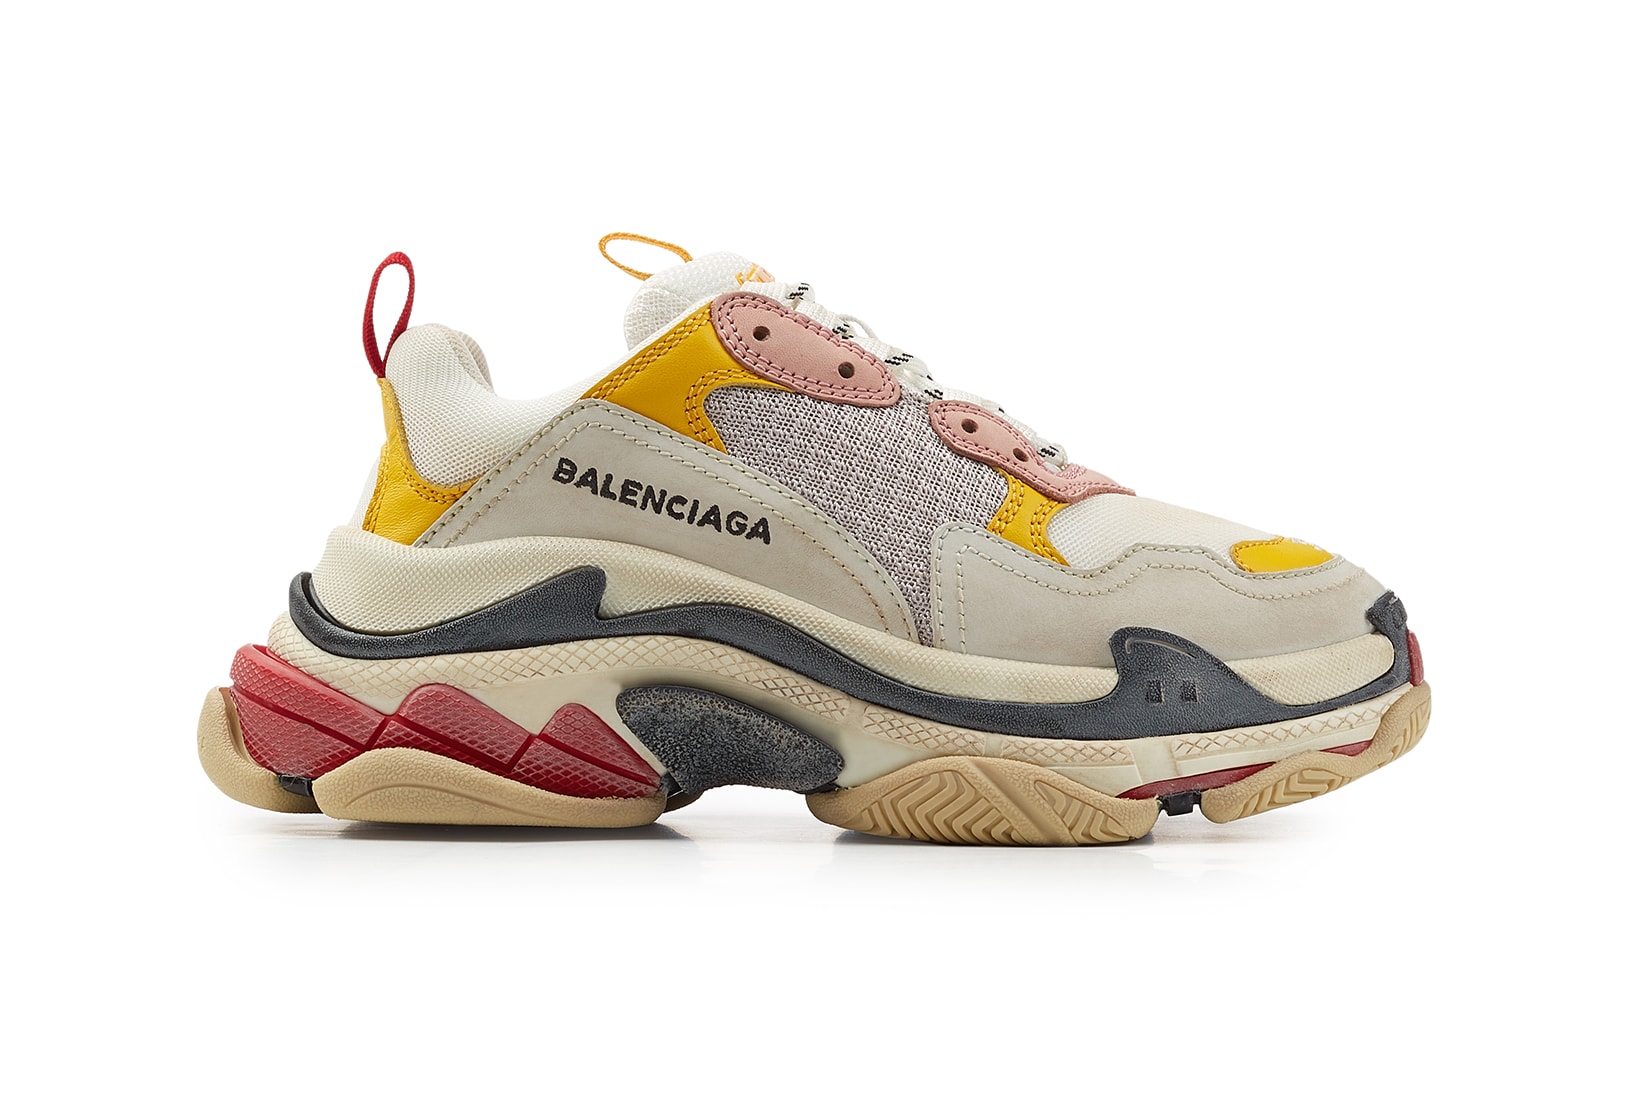 Balenciaga Triple S 2018 new colorways mens womens only exclusive black silver metallic pink where to buy stylebop